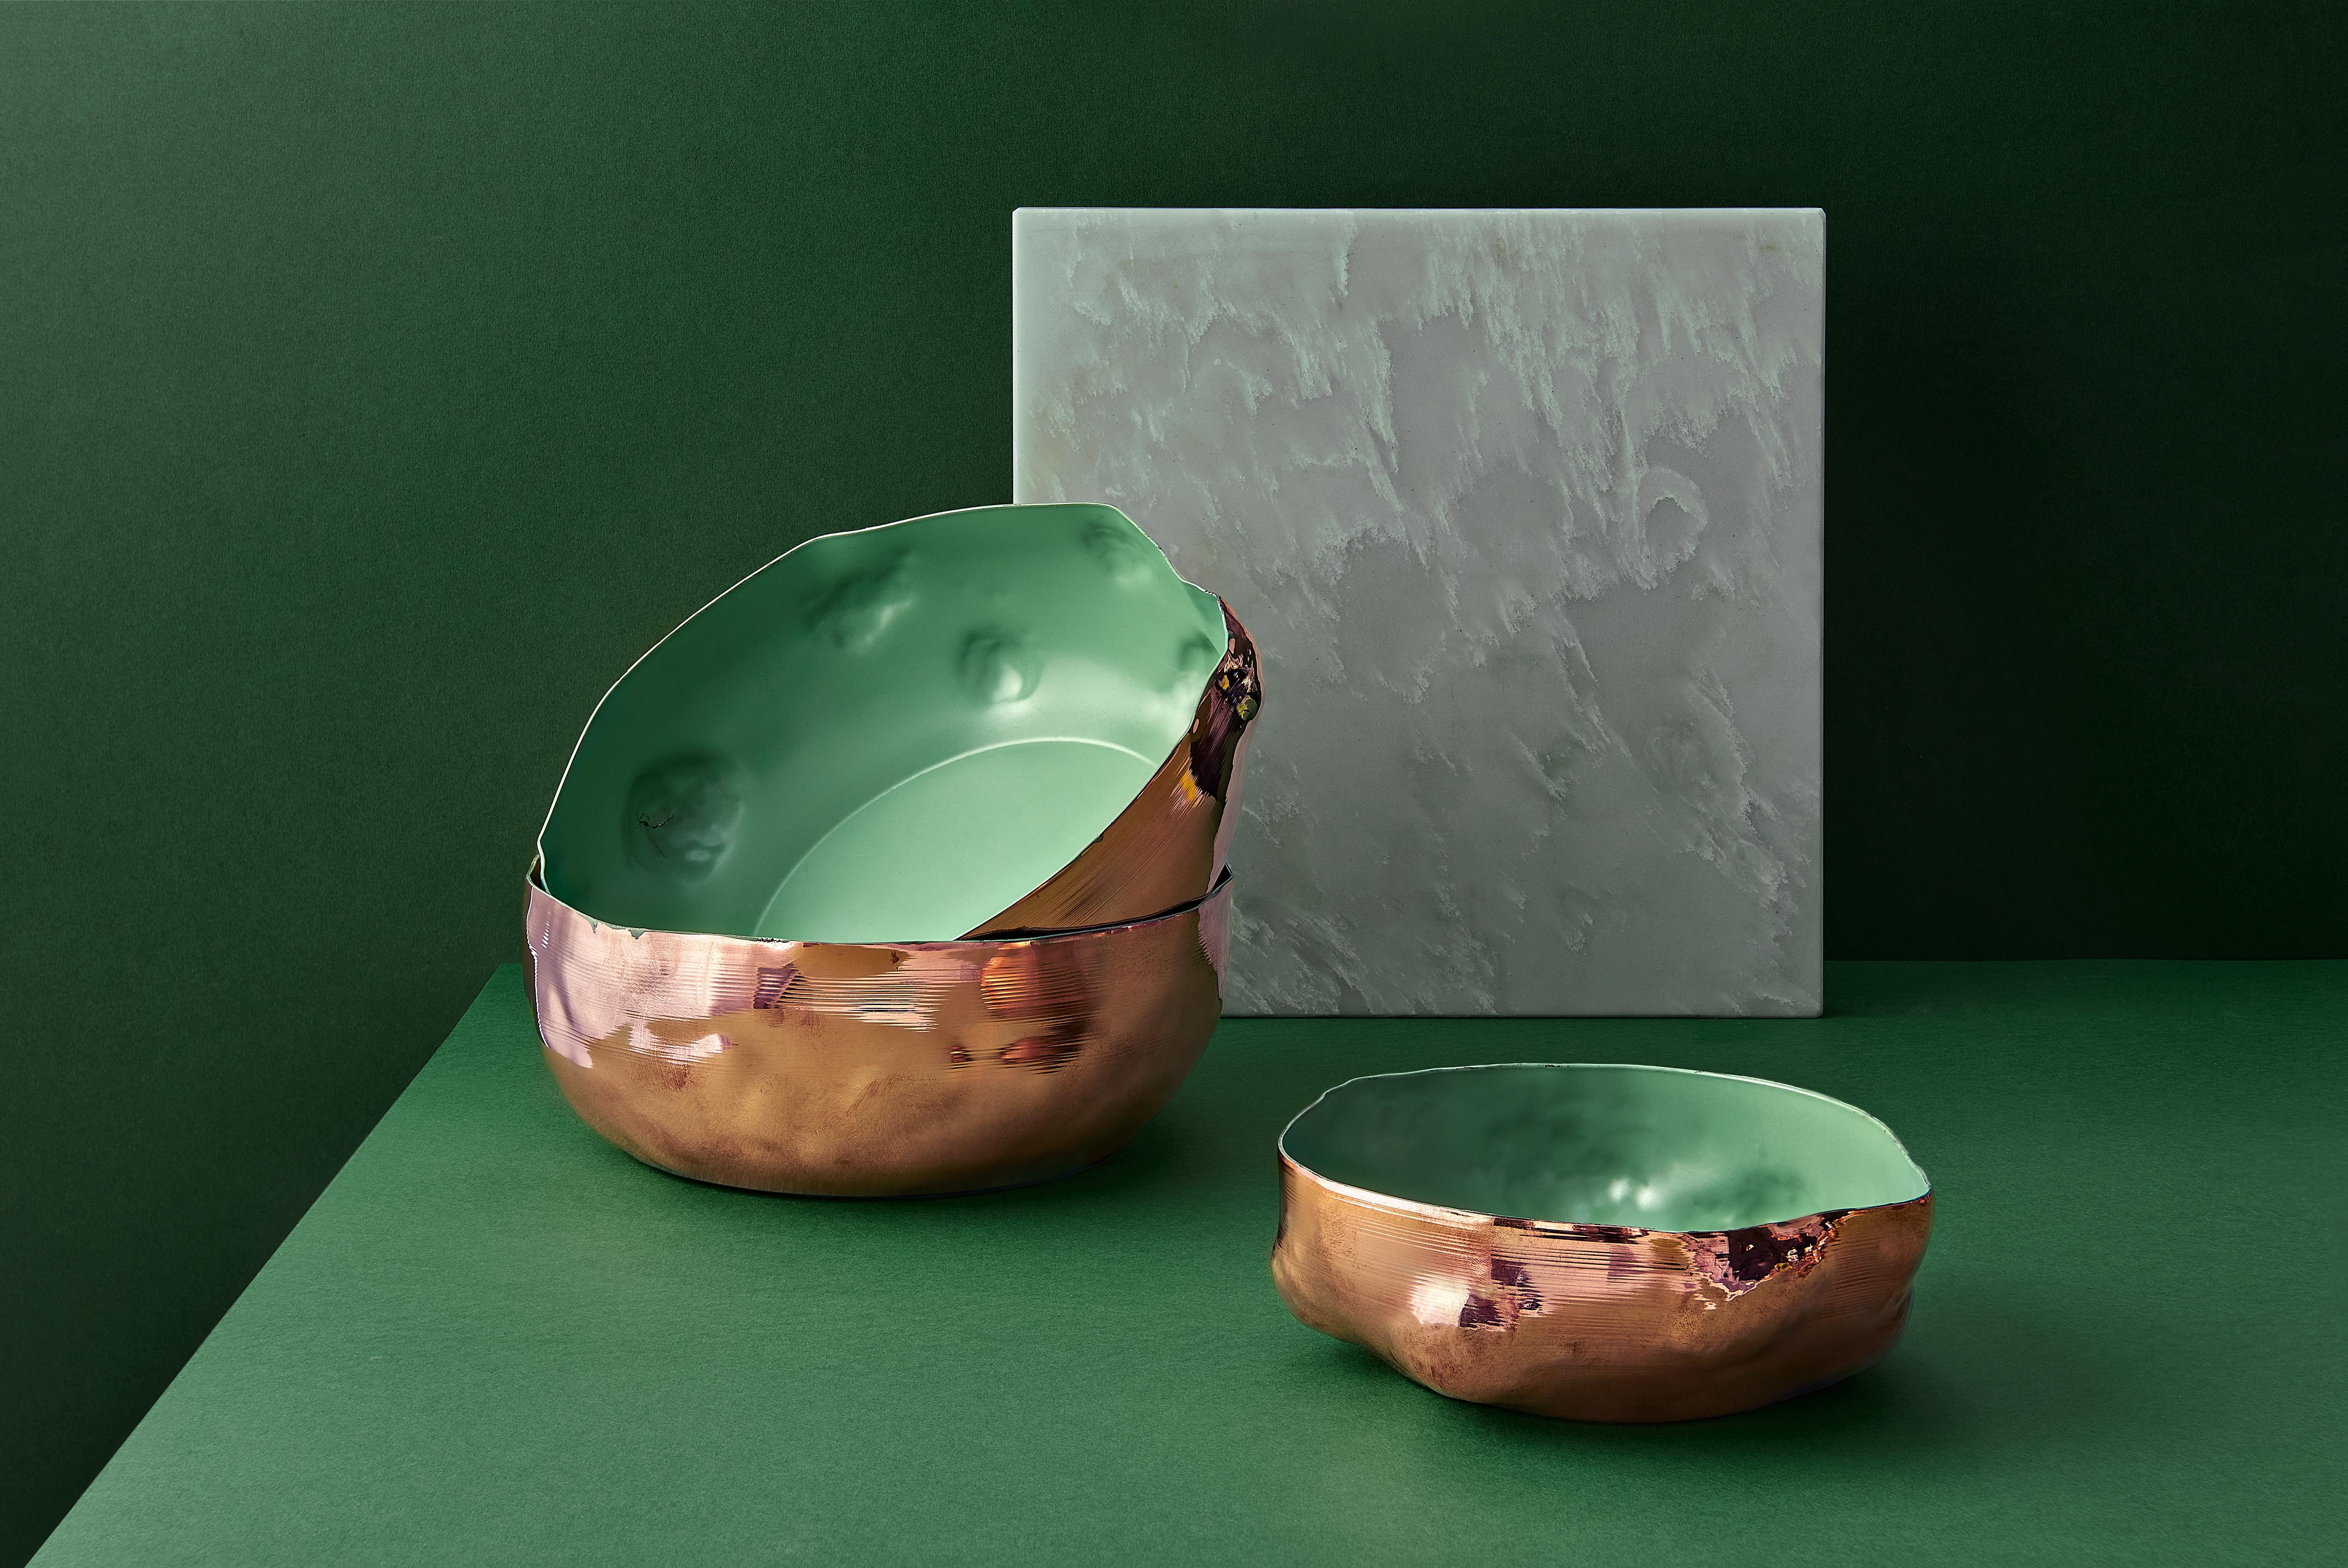 Hammered Momento Handmade Colourful Bowl by Jordan Keaney - Copper For Sale